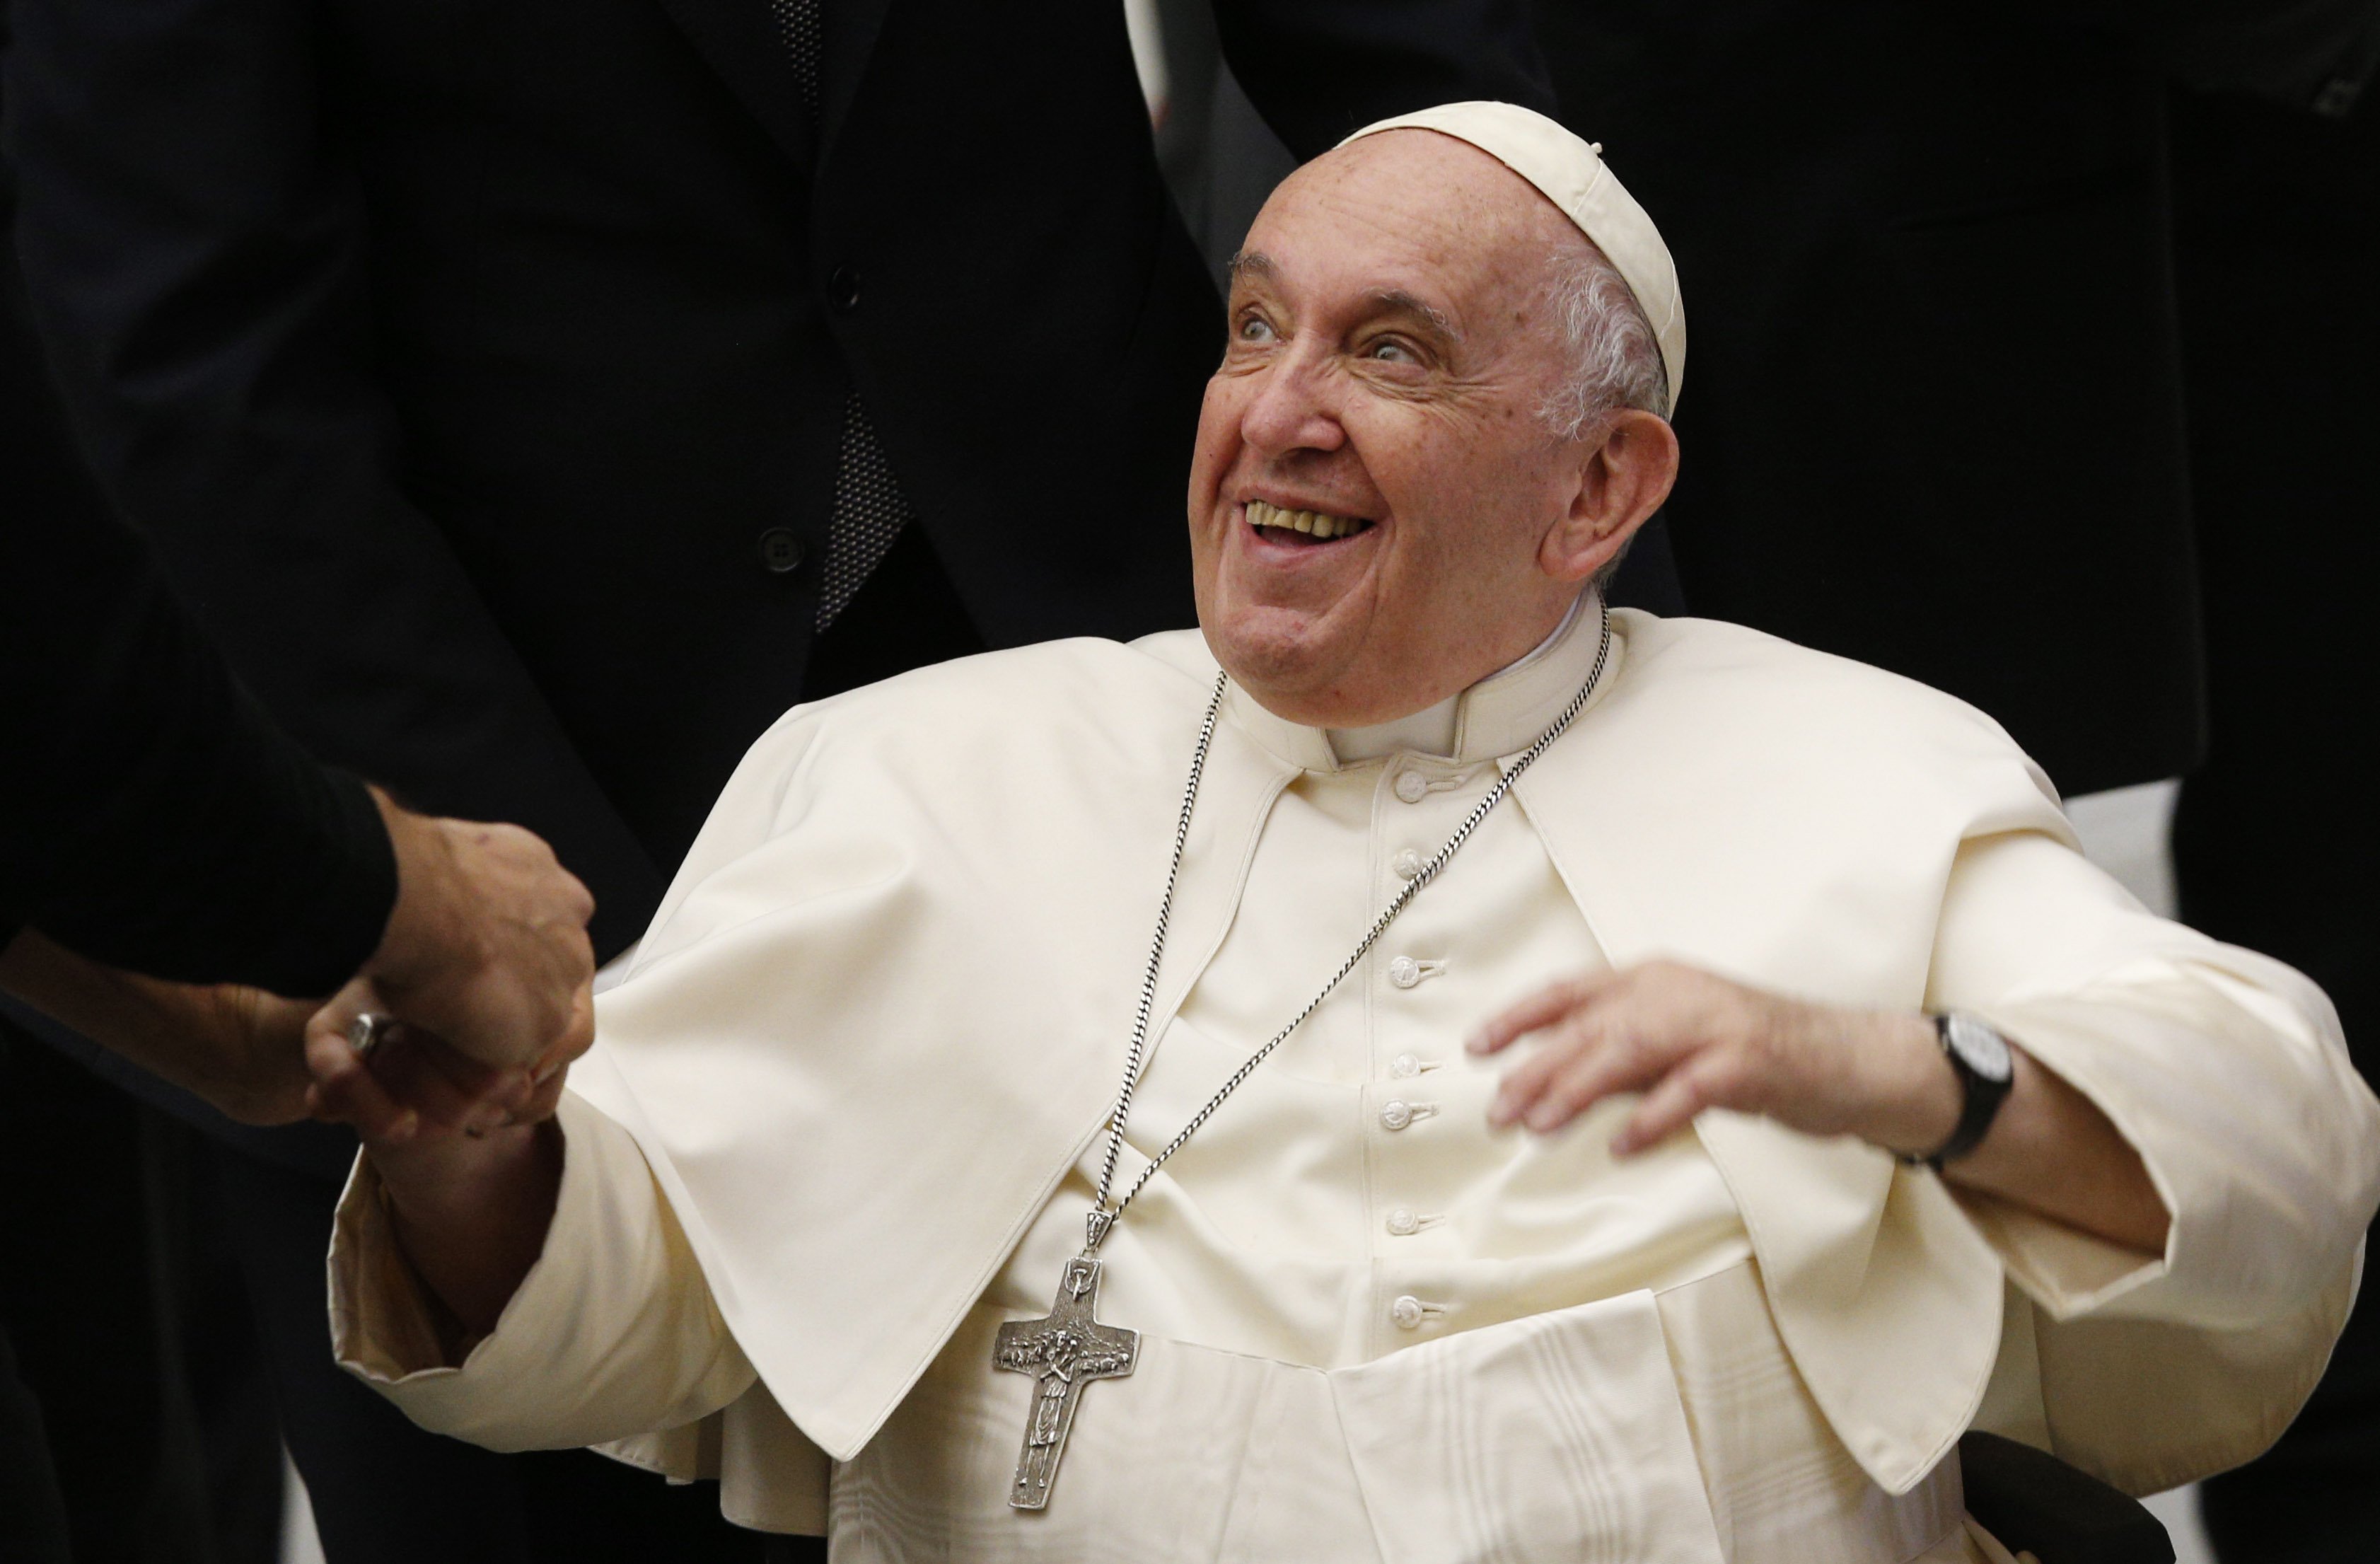 Pope Francis on discernment: The devil knows how to dress up like an angel. vigilance to tell difference. | America Magazine